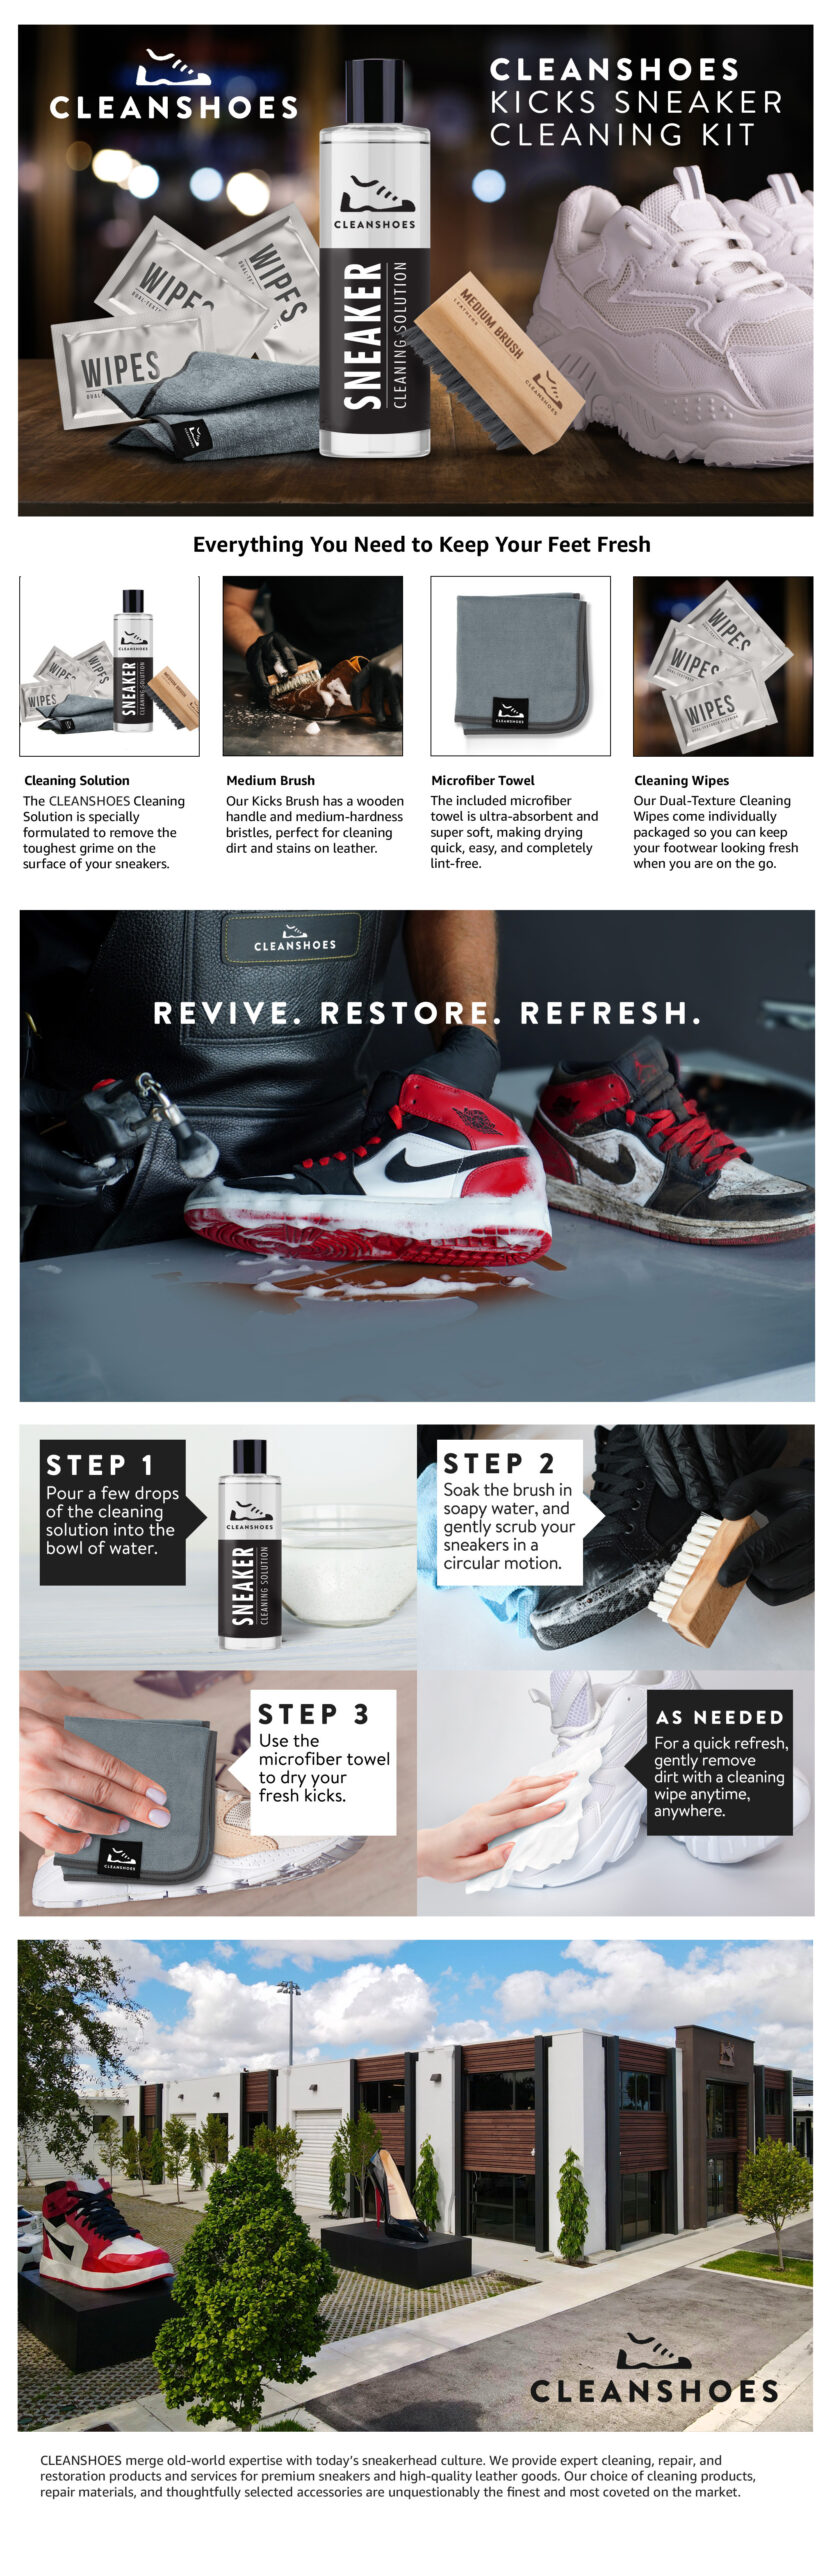 Sneaker Cleaning Kit A+ Content